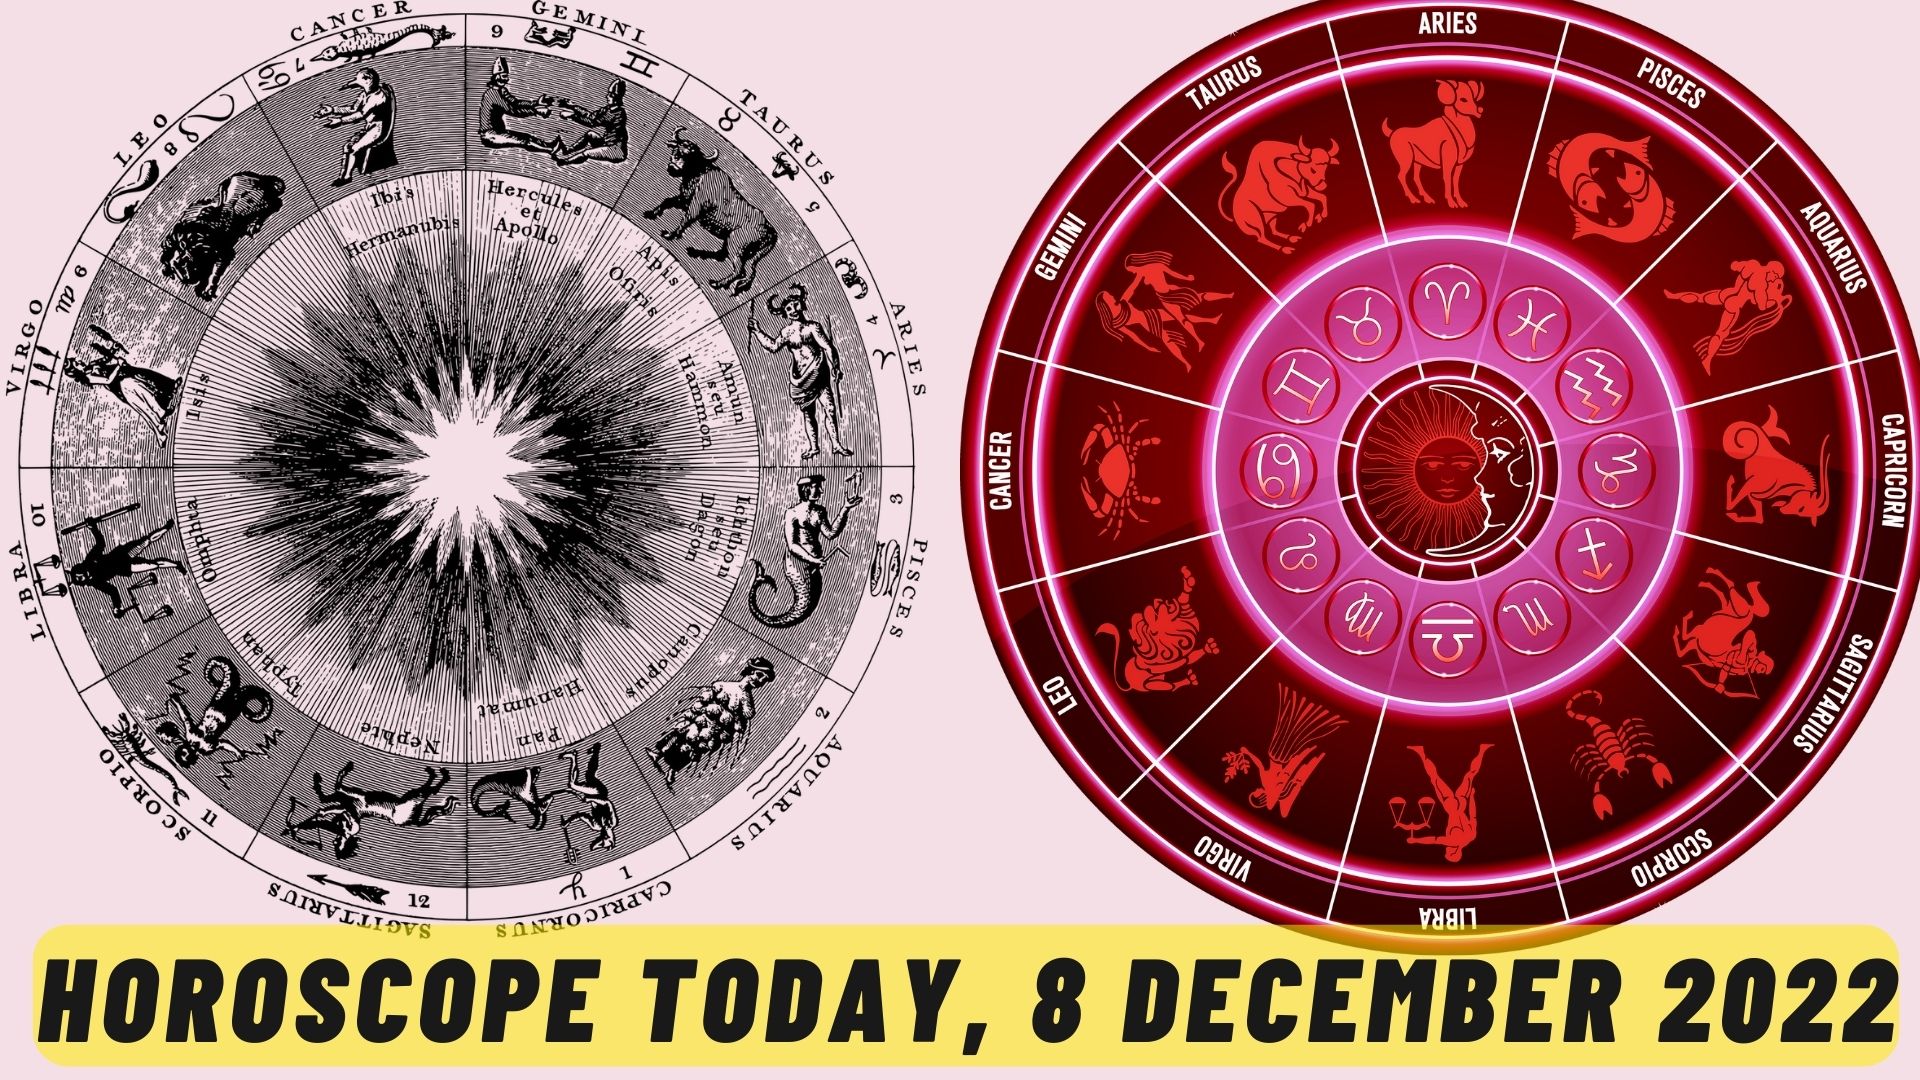 Horoscope Today, 8 December 2022 - Check Astrological Prediction Of Your Zodiac Sign